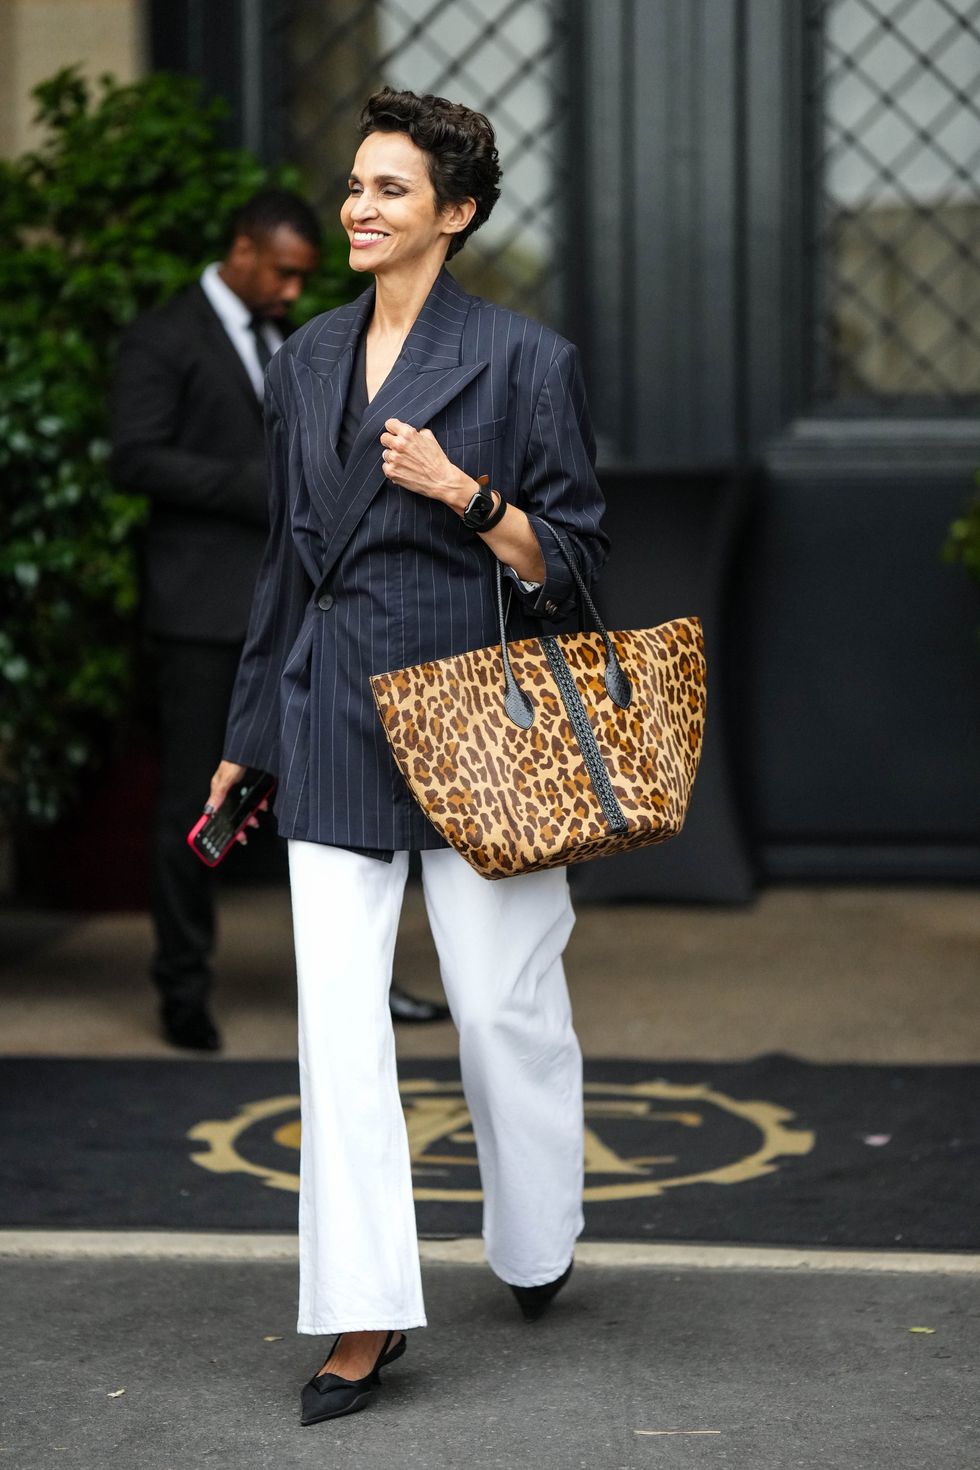 paris, france june 26 farida khelfa wears a black v neck blouse, a black with white small striped print pattern oversized blazer jacket, white denim wide legs pants, a brown and beige leopard print pattern large handbag, black nylon pointed pumps heels shoes from prada, silver rings, a black apple watch, outside the thom browne show, during paris fashion week menswear springsummer 2023, on june 26, 2022 in paris, france photo by edward berthelotgetty images